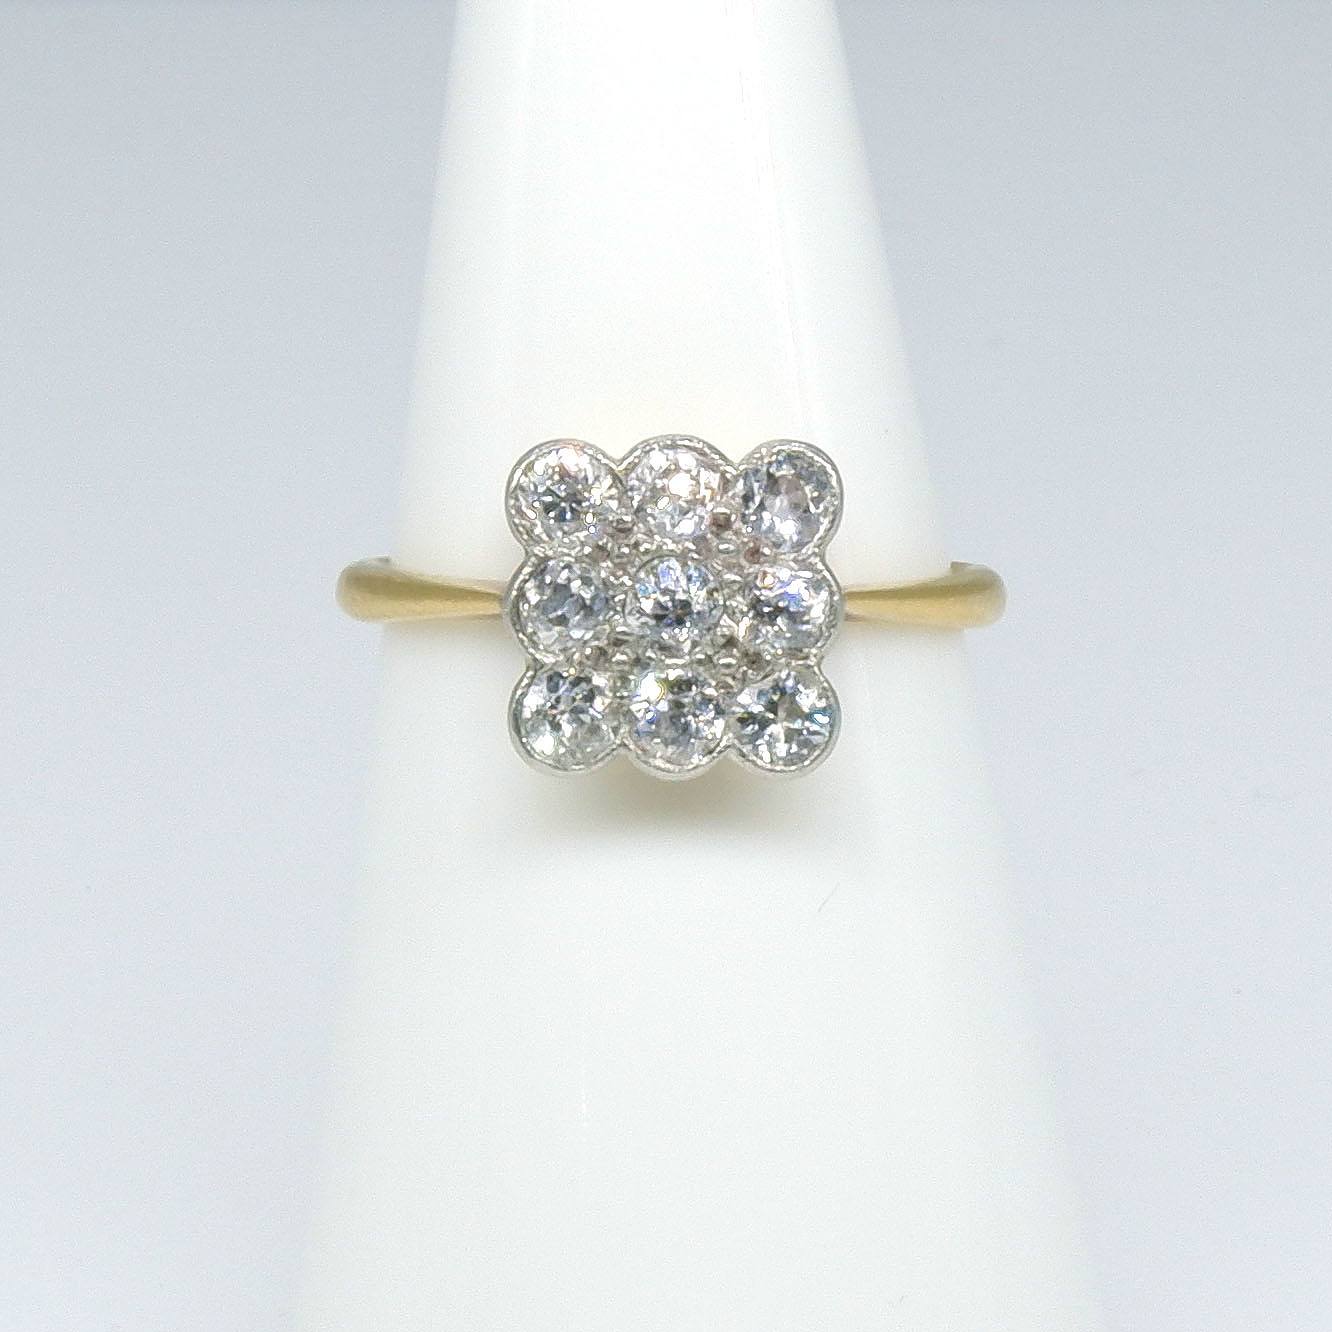 'Antique 18ct Yellow and White Gold Ring with Nine Old European Cut Diamonds'